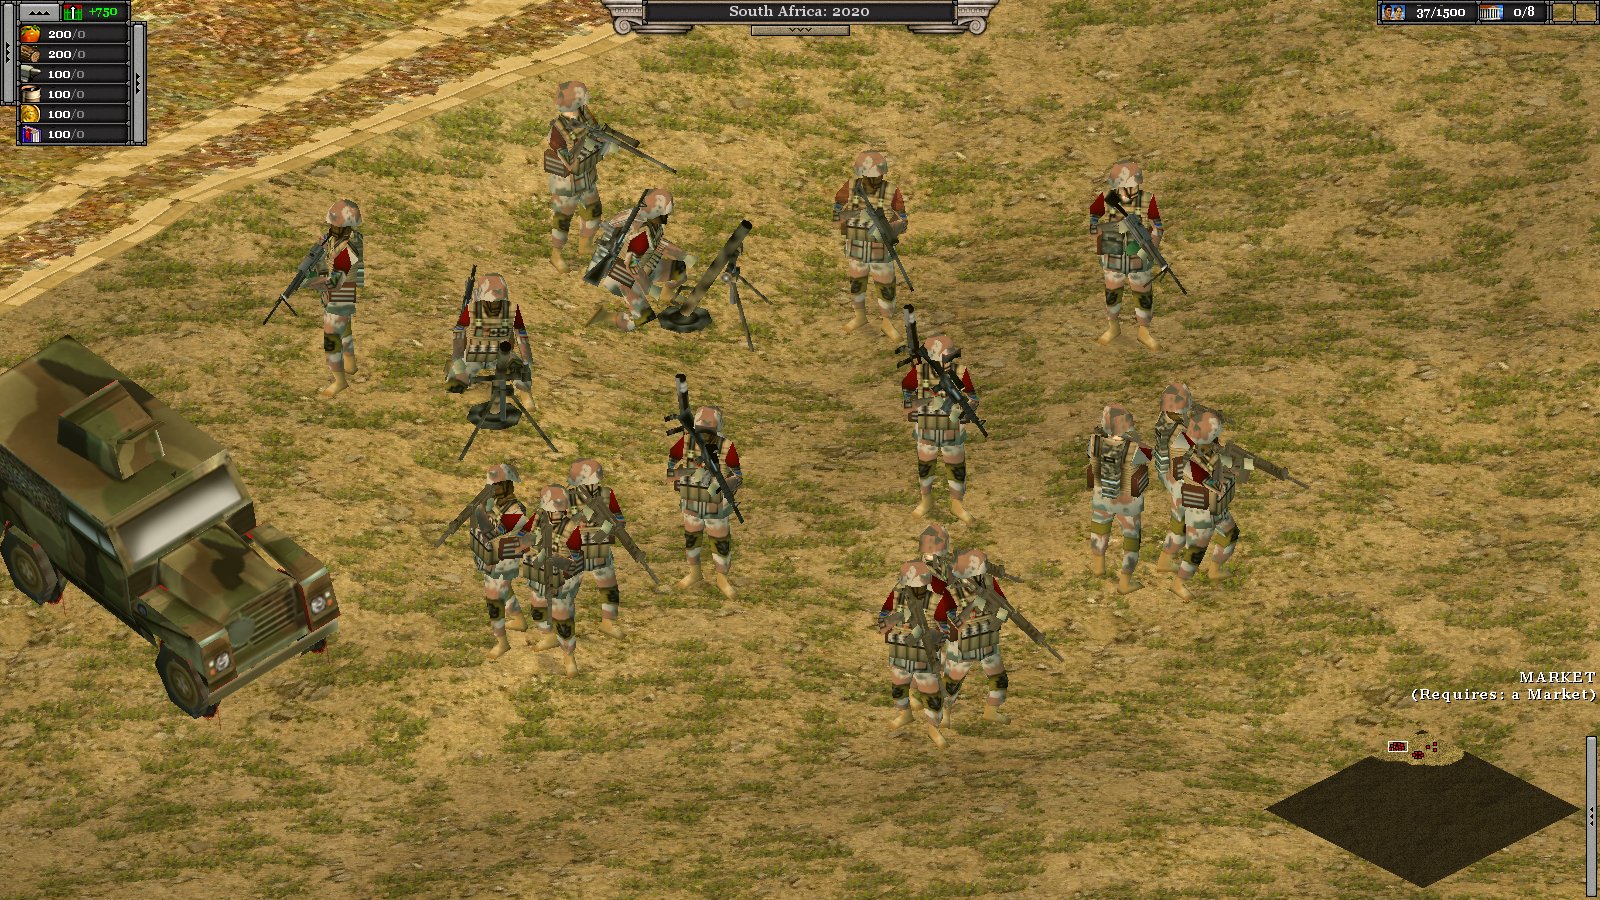 Cuba image - Fierce War mod for Rise of Nations: Thrones and Patriots - Mod  DB